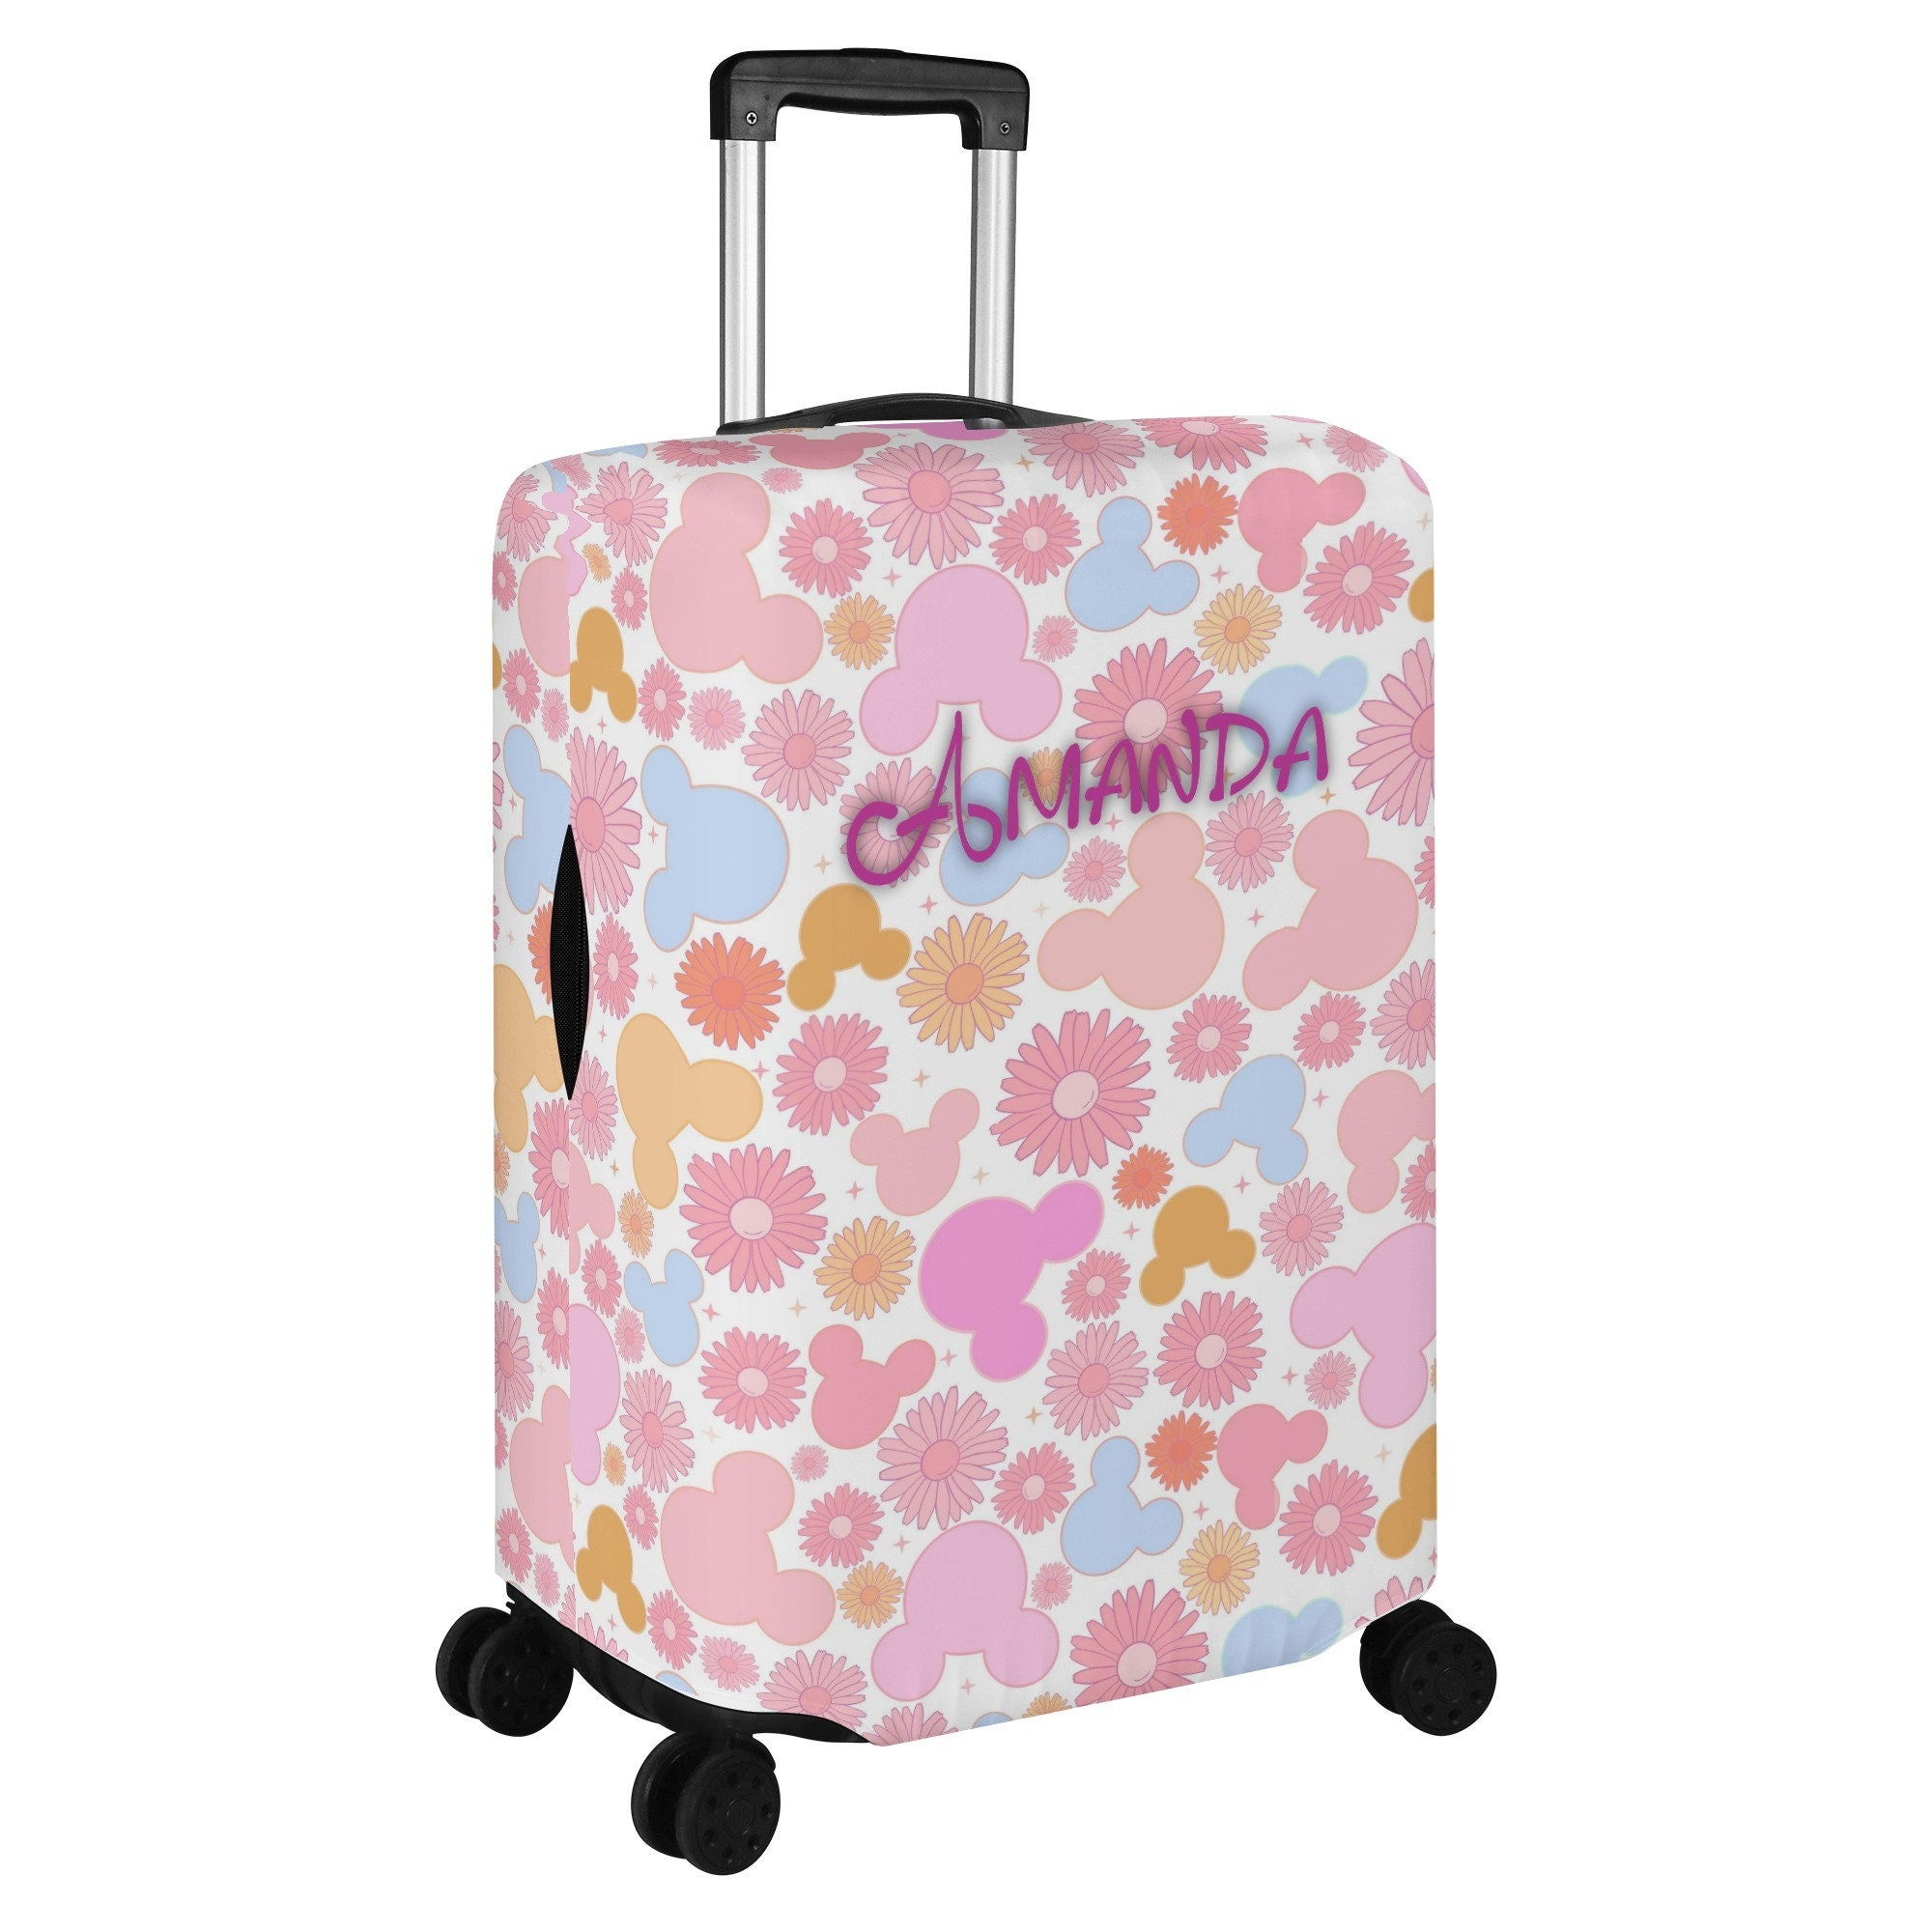 Personalized Luggage Cover Perfect for Disney Trips